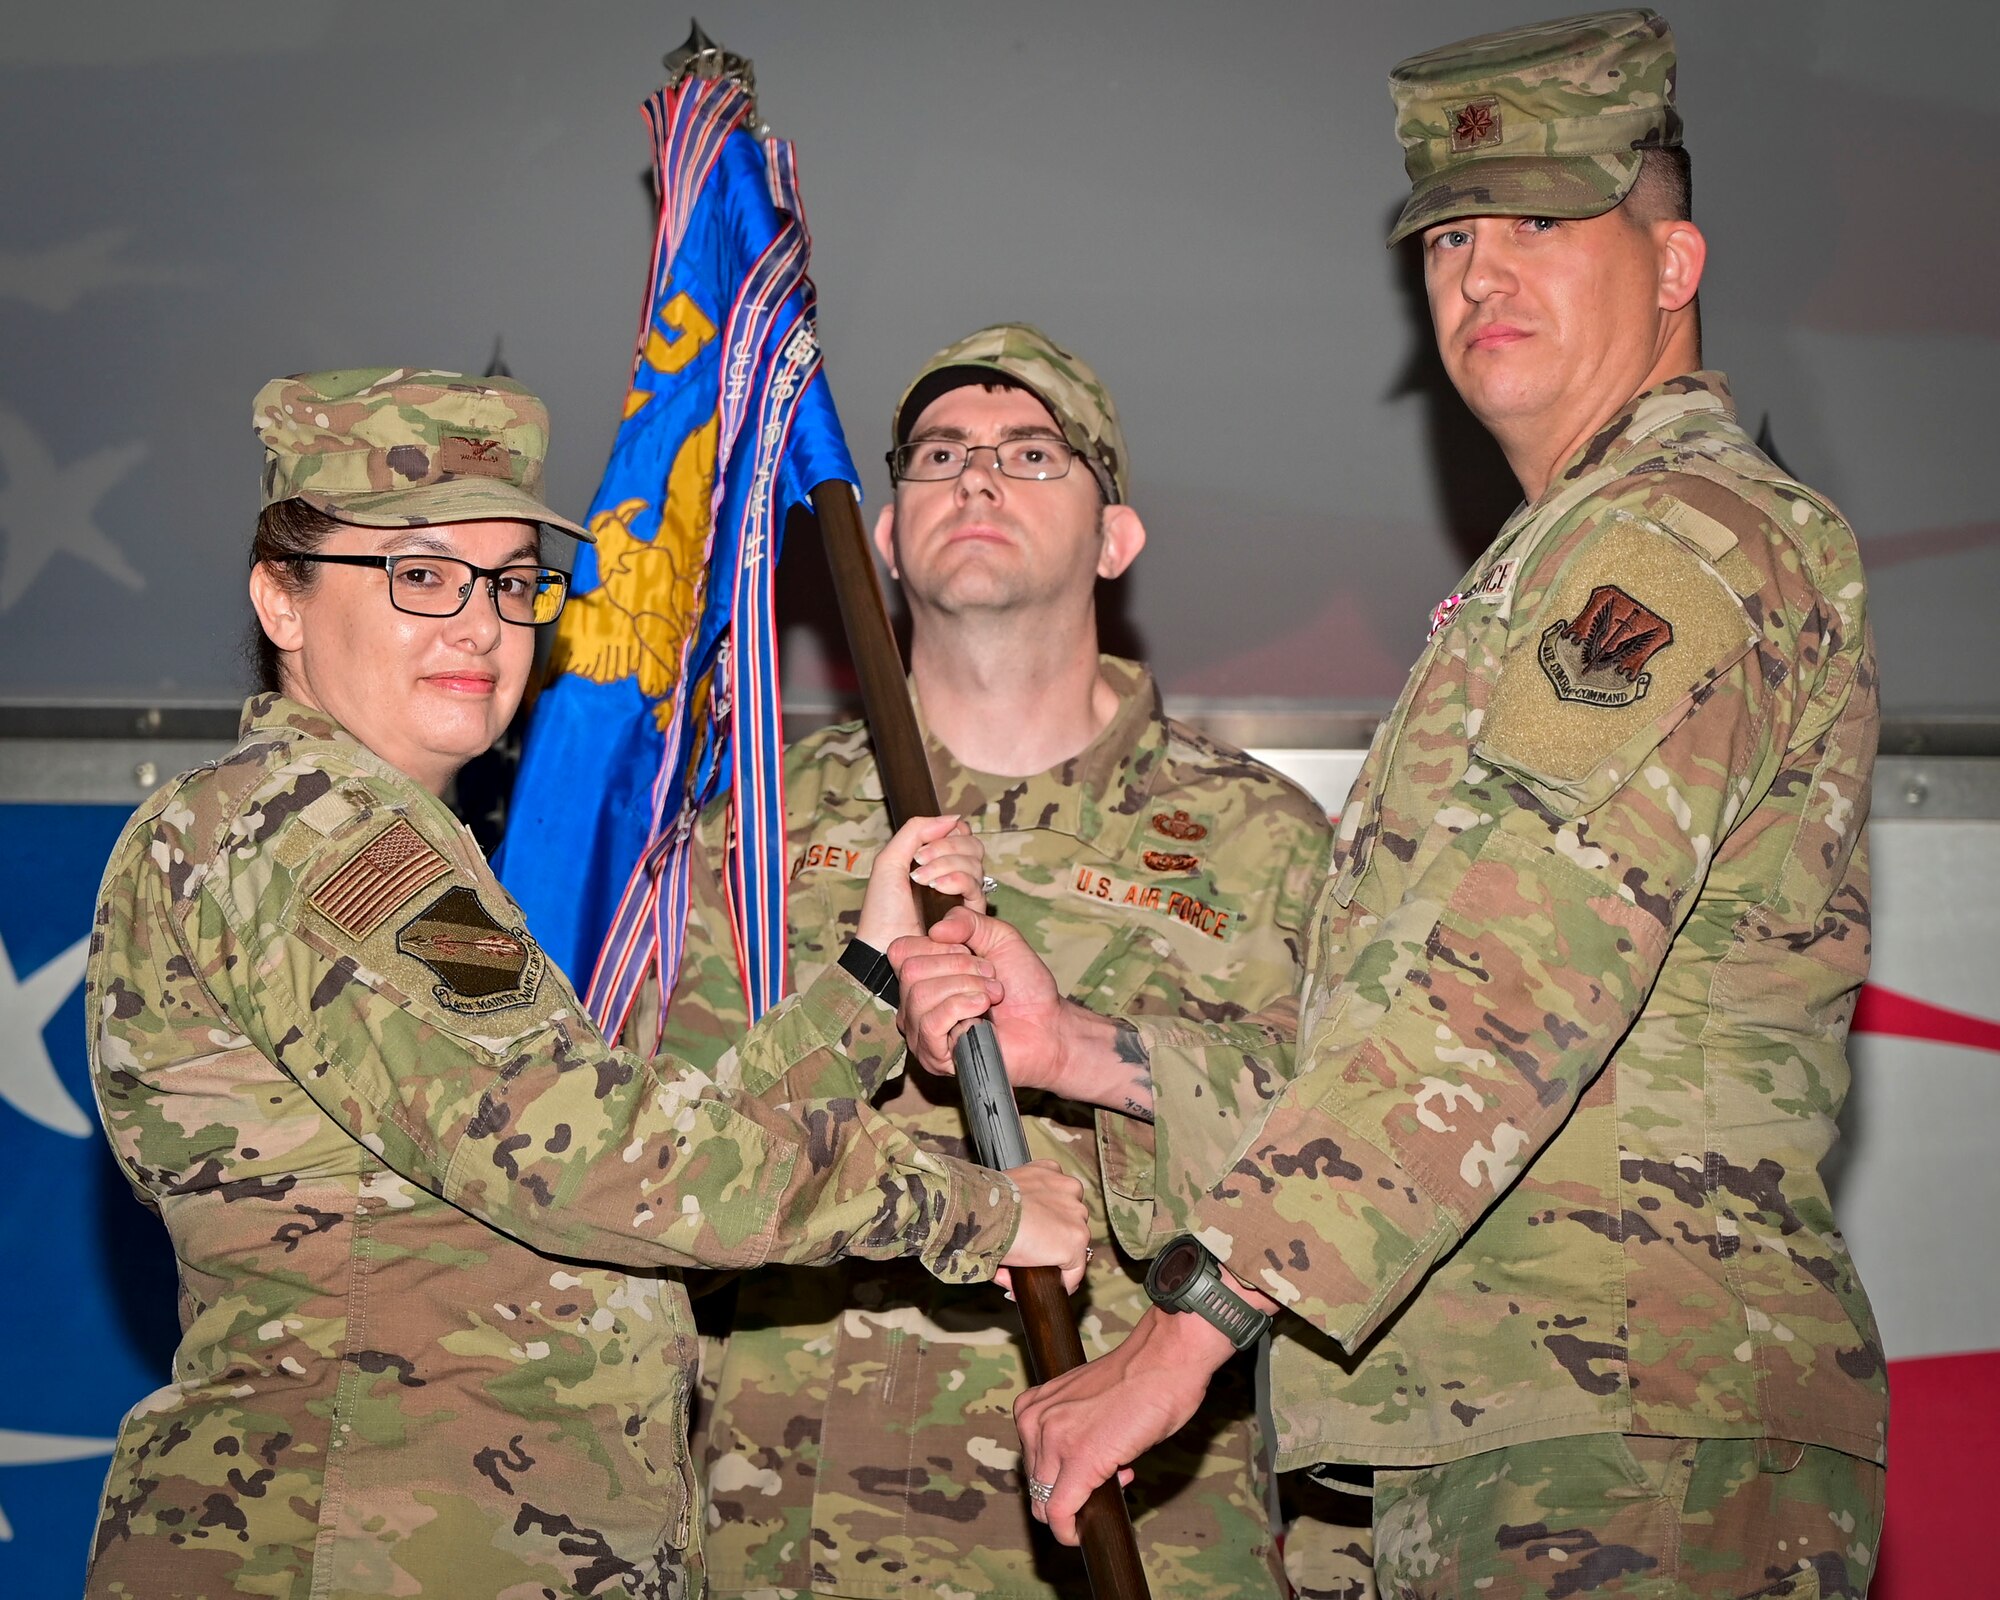 Col. Kathryn Roman, left, 4th Maintenance Group commander, receives the guidon from Maj. Mark Smith, 4th Component Maintenance Squadron outgoing commander, during a change of command ceremony at Seymour Johnson Air Force Base, North Carolina, March 3, 2023. This event serves to formally and publicly transfer command of the 4th CMS from the outgoing to the incoming commander. (U.S. Air Force photo by Staff Sgt. Sean Martin)